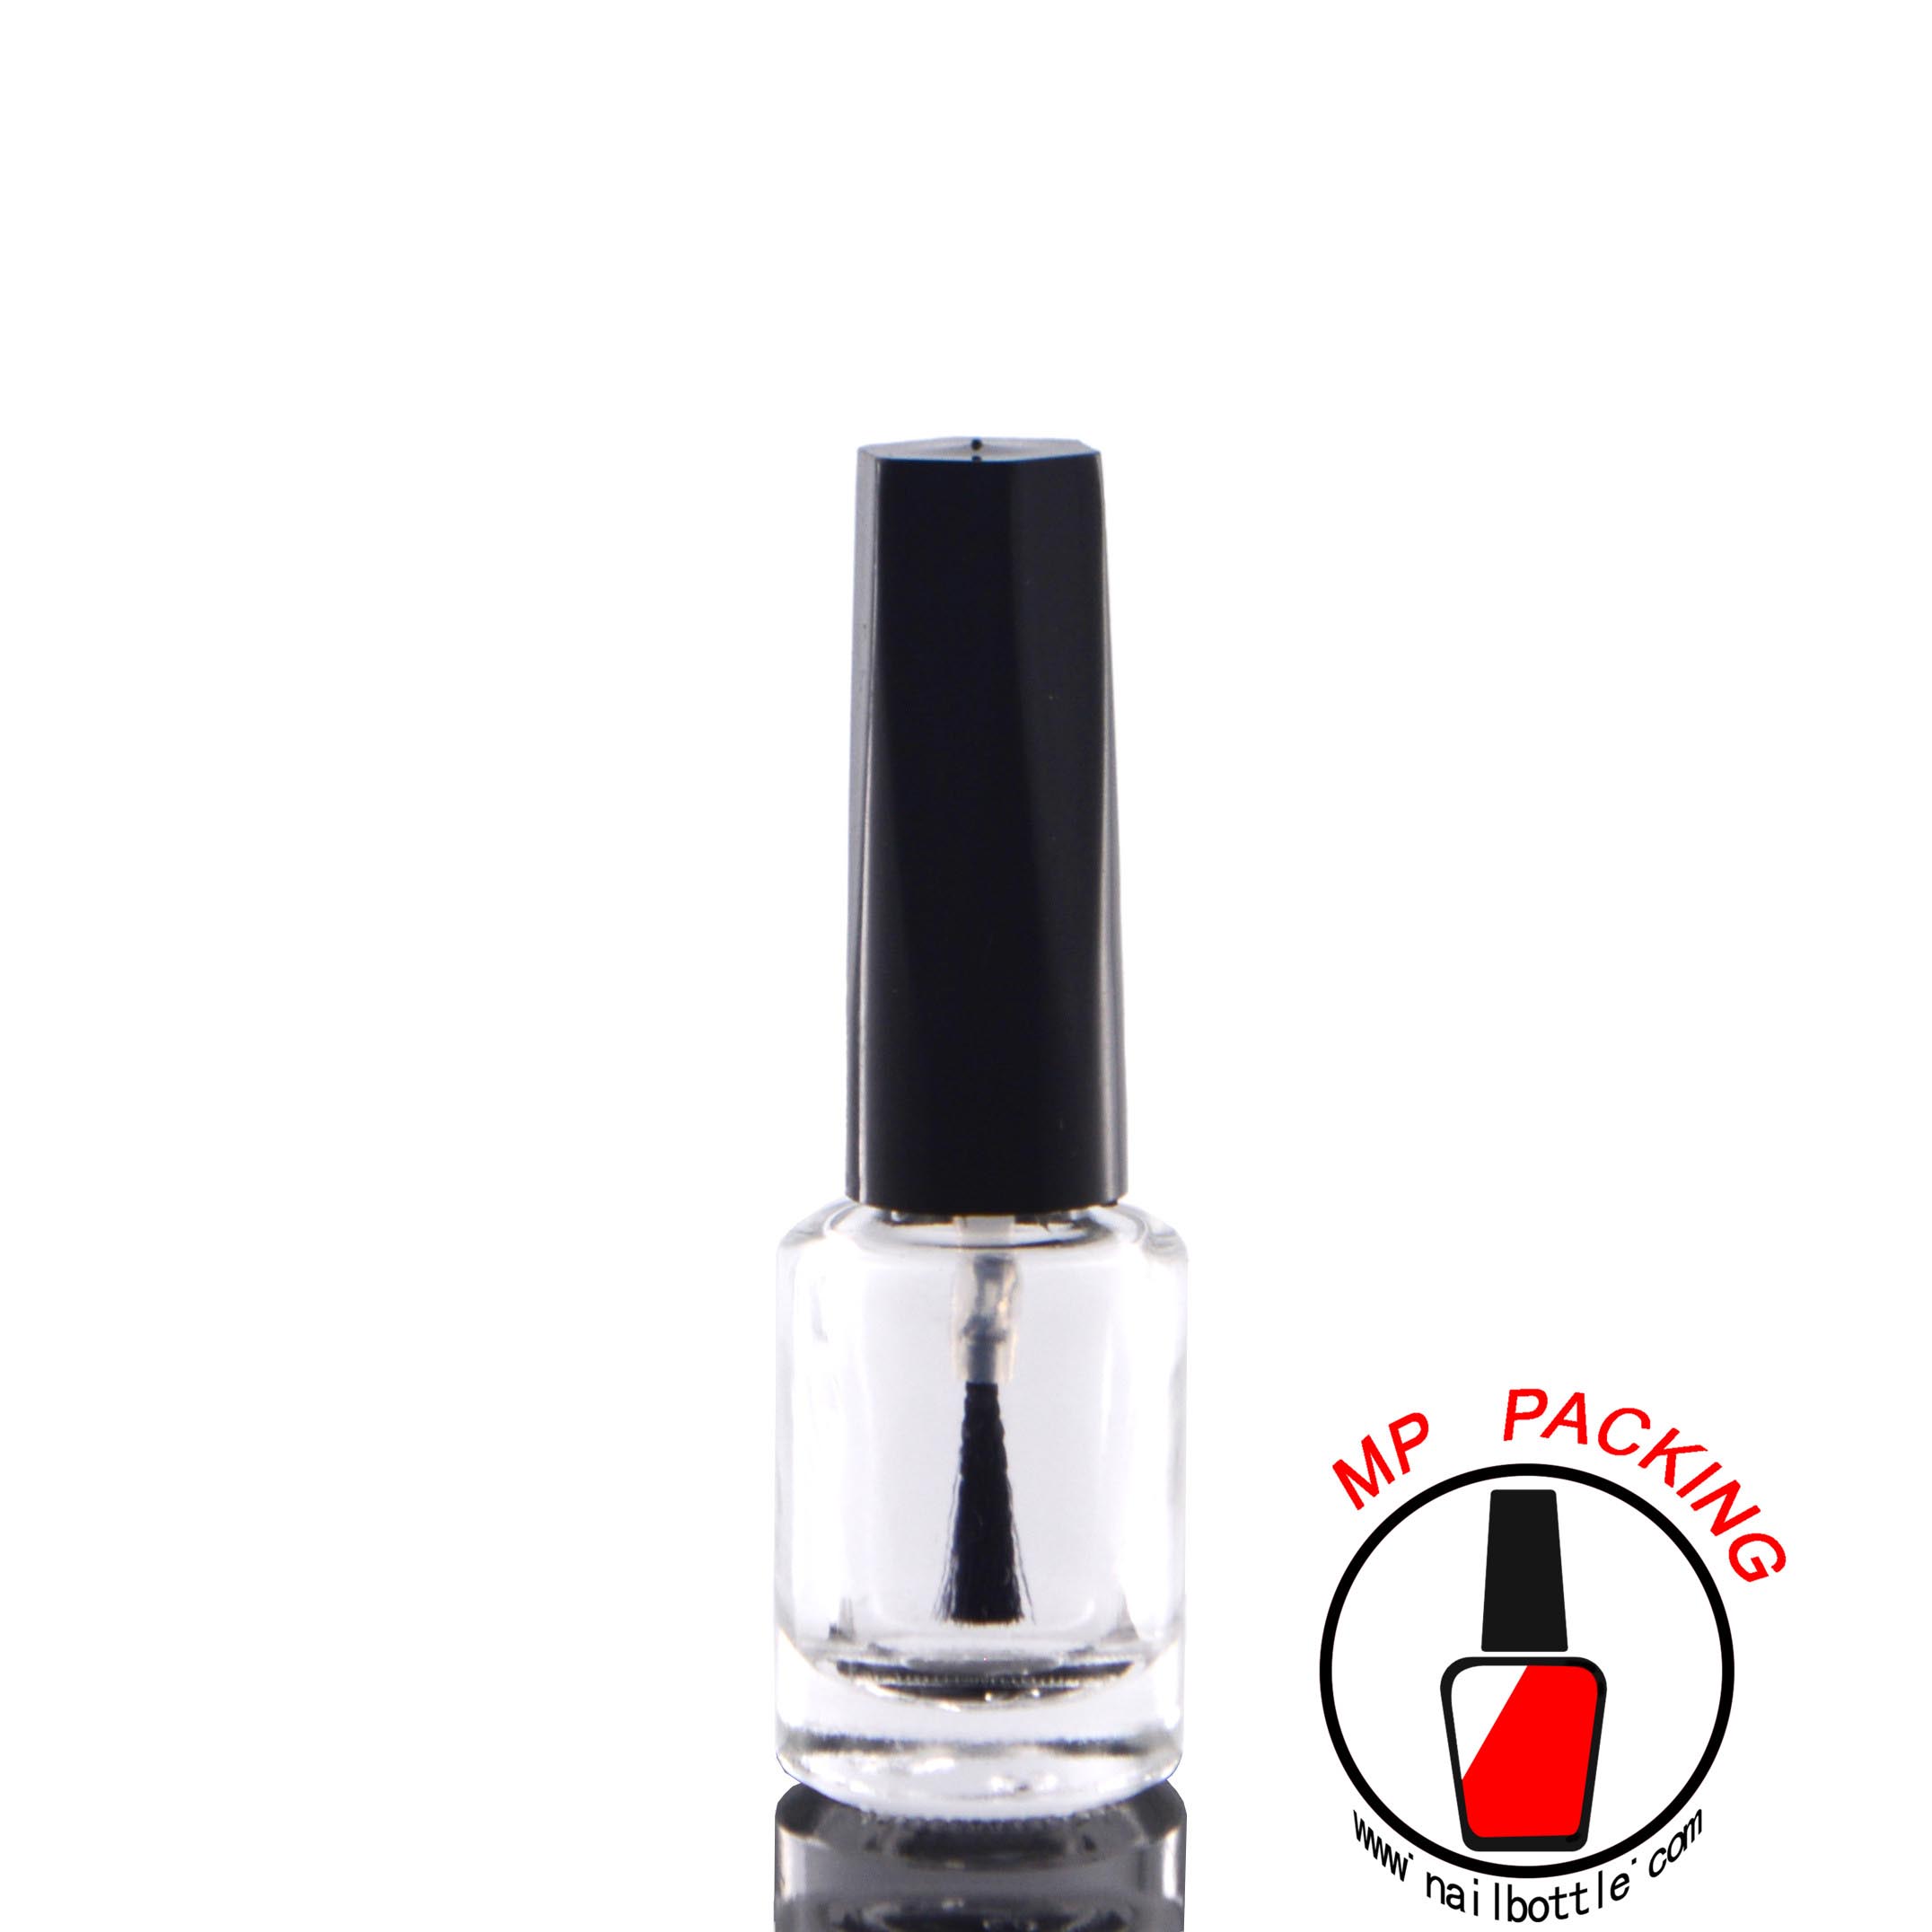 cosmo round shape empty nail polish bottles with brush and cap